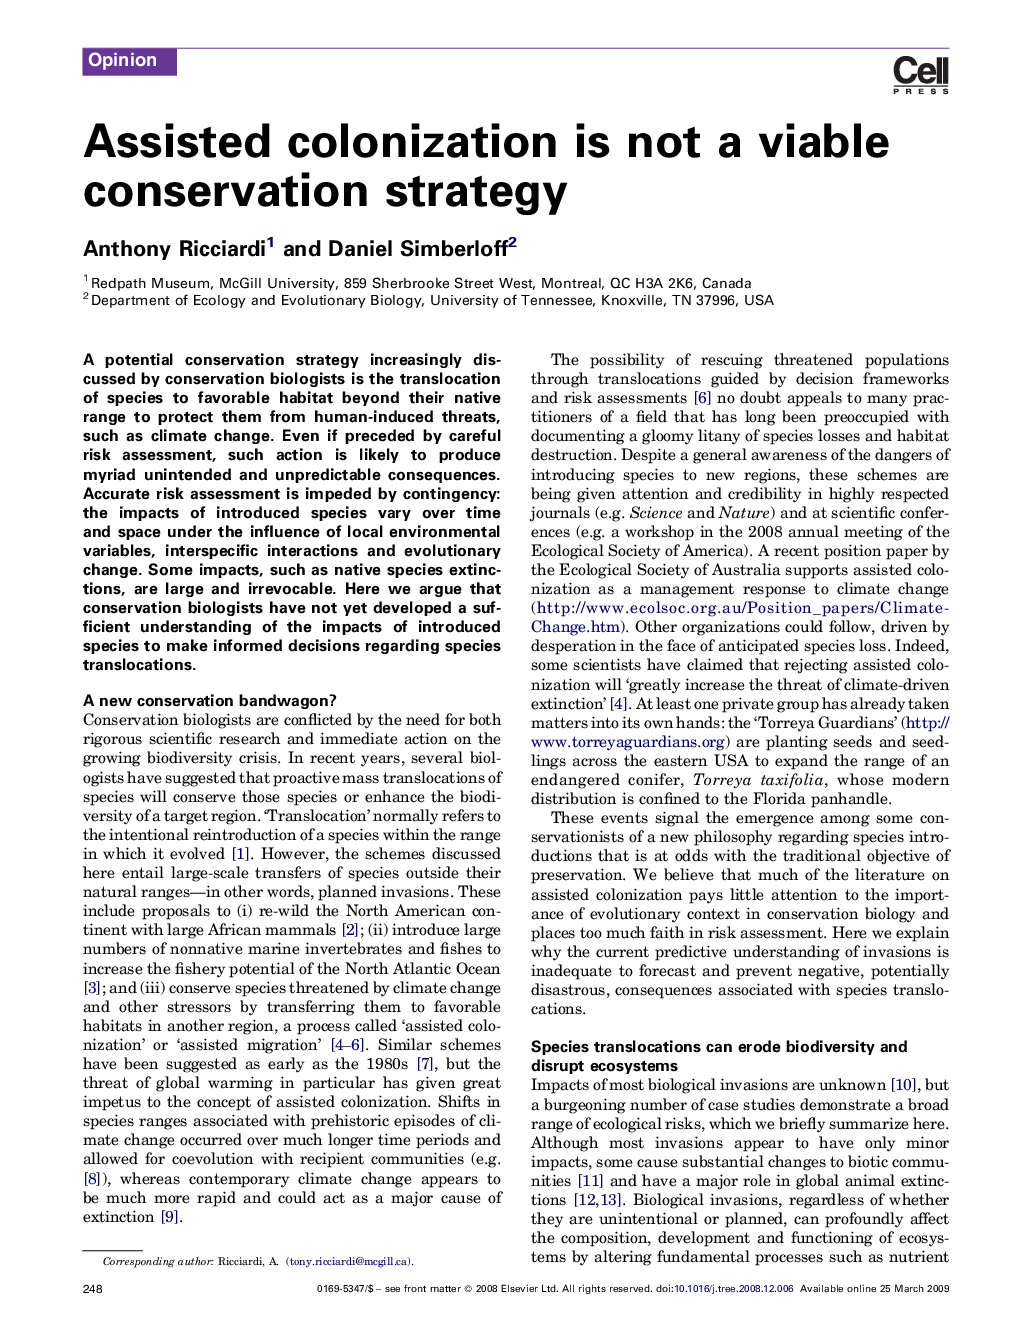 Assisted colonization is not a viable conservation strategy